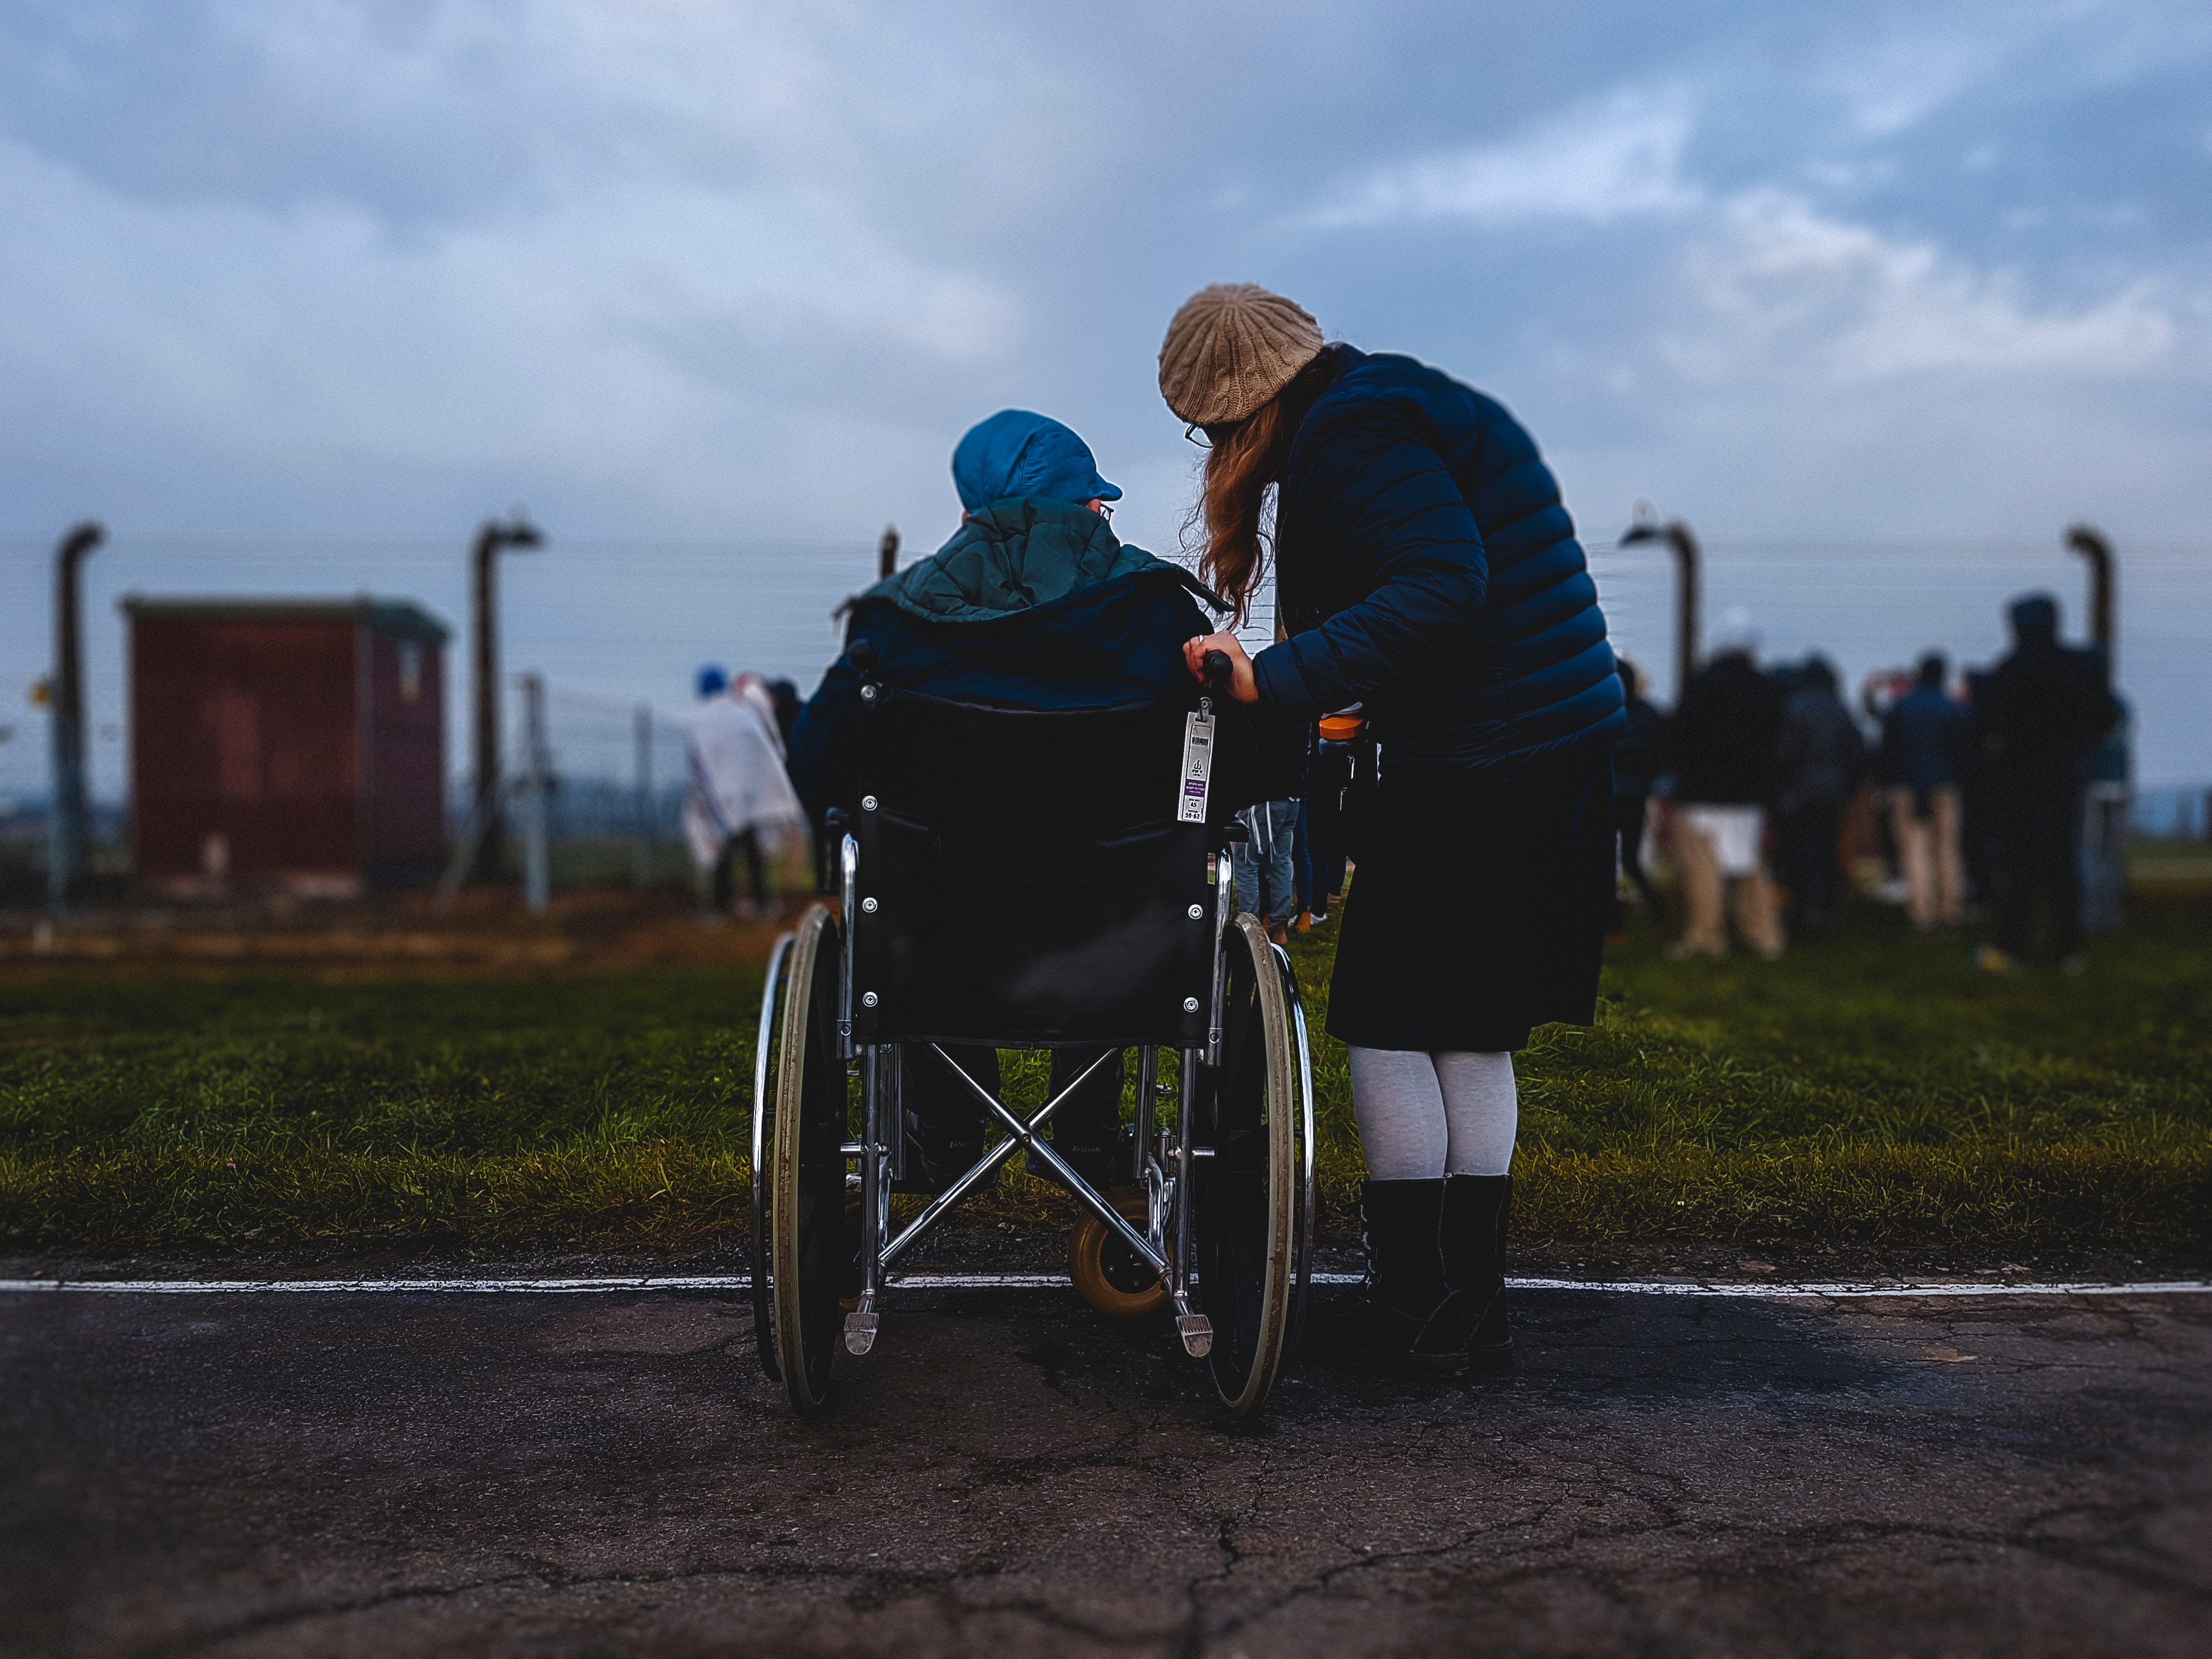 a young person next to an older person in a wheelchair